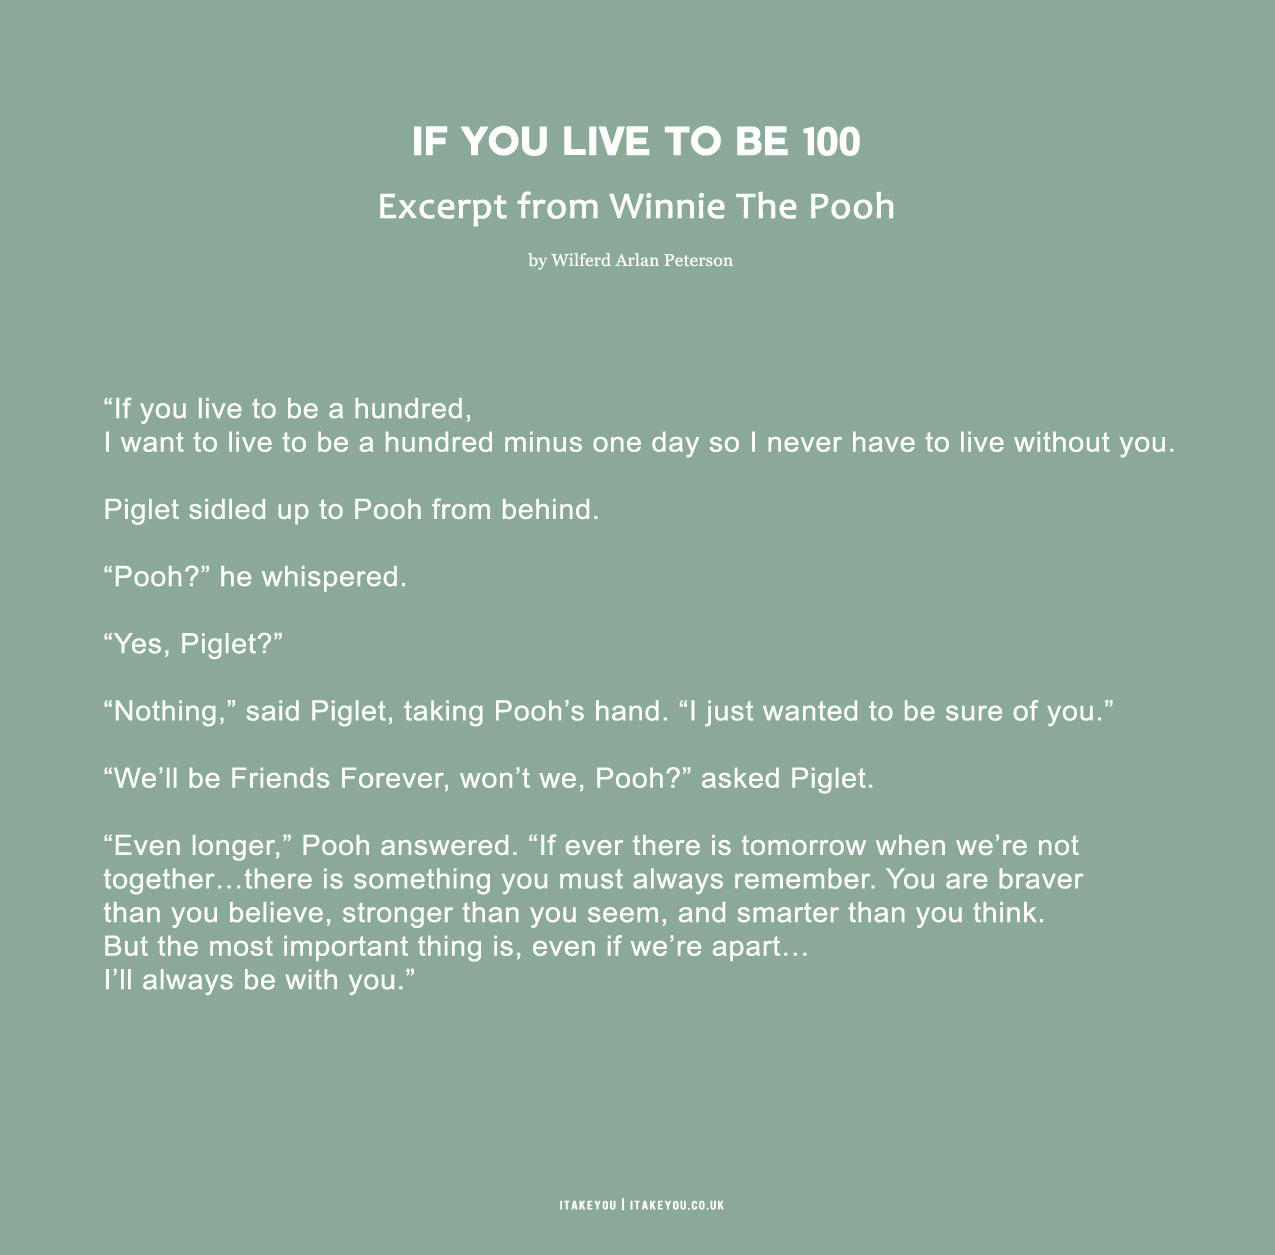 If you live to be 100 — Winnie The Pooh The House at Pooh Corner by A.A. Milne